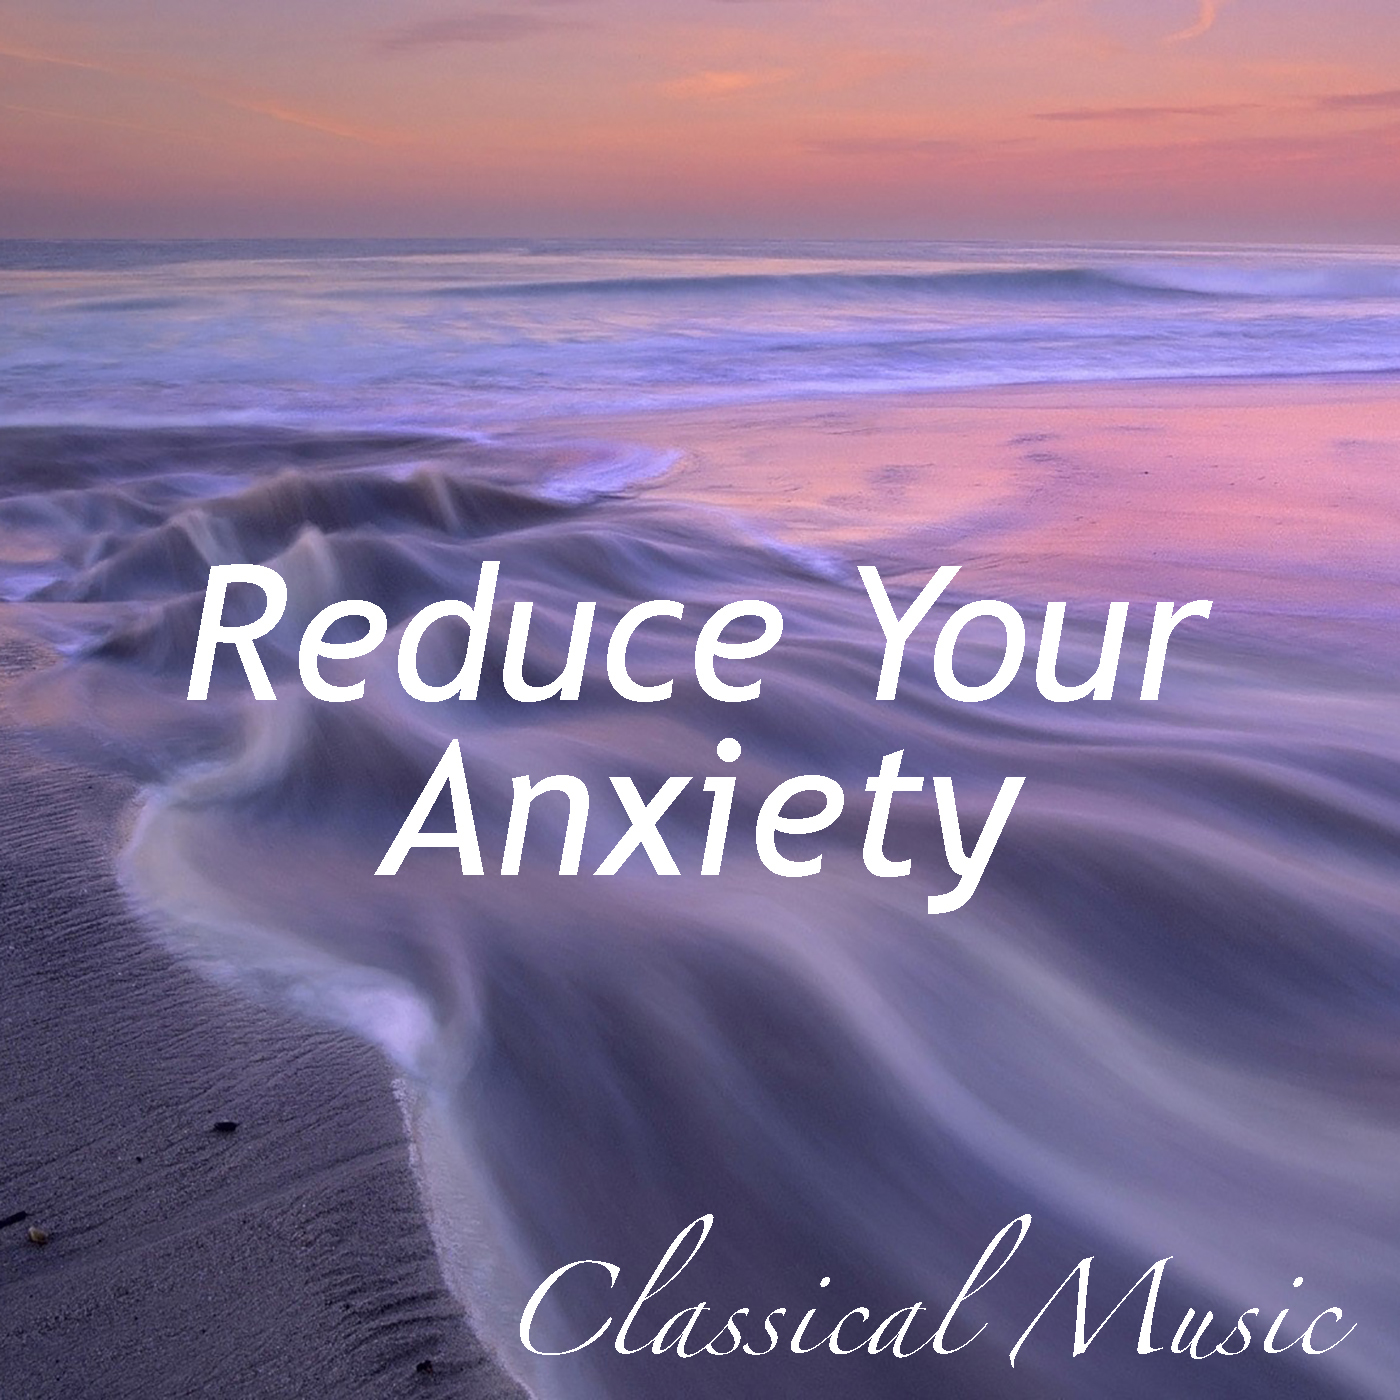 Reduce Your Anxiety: Classical Music